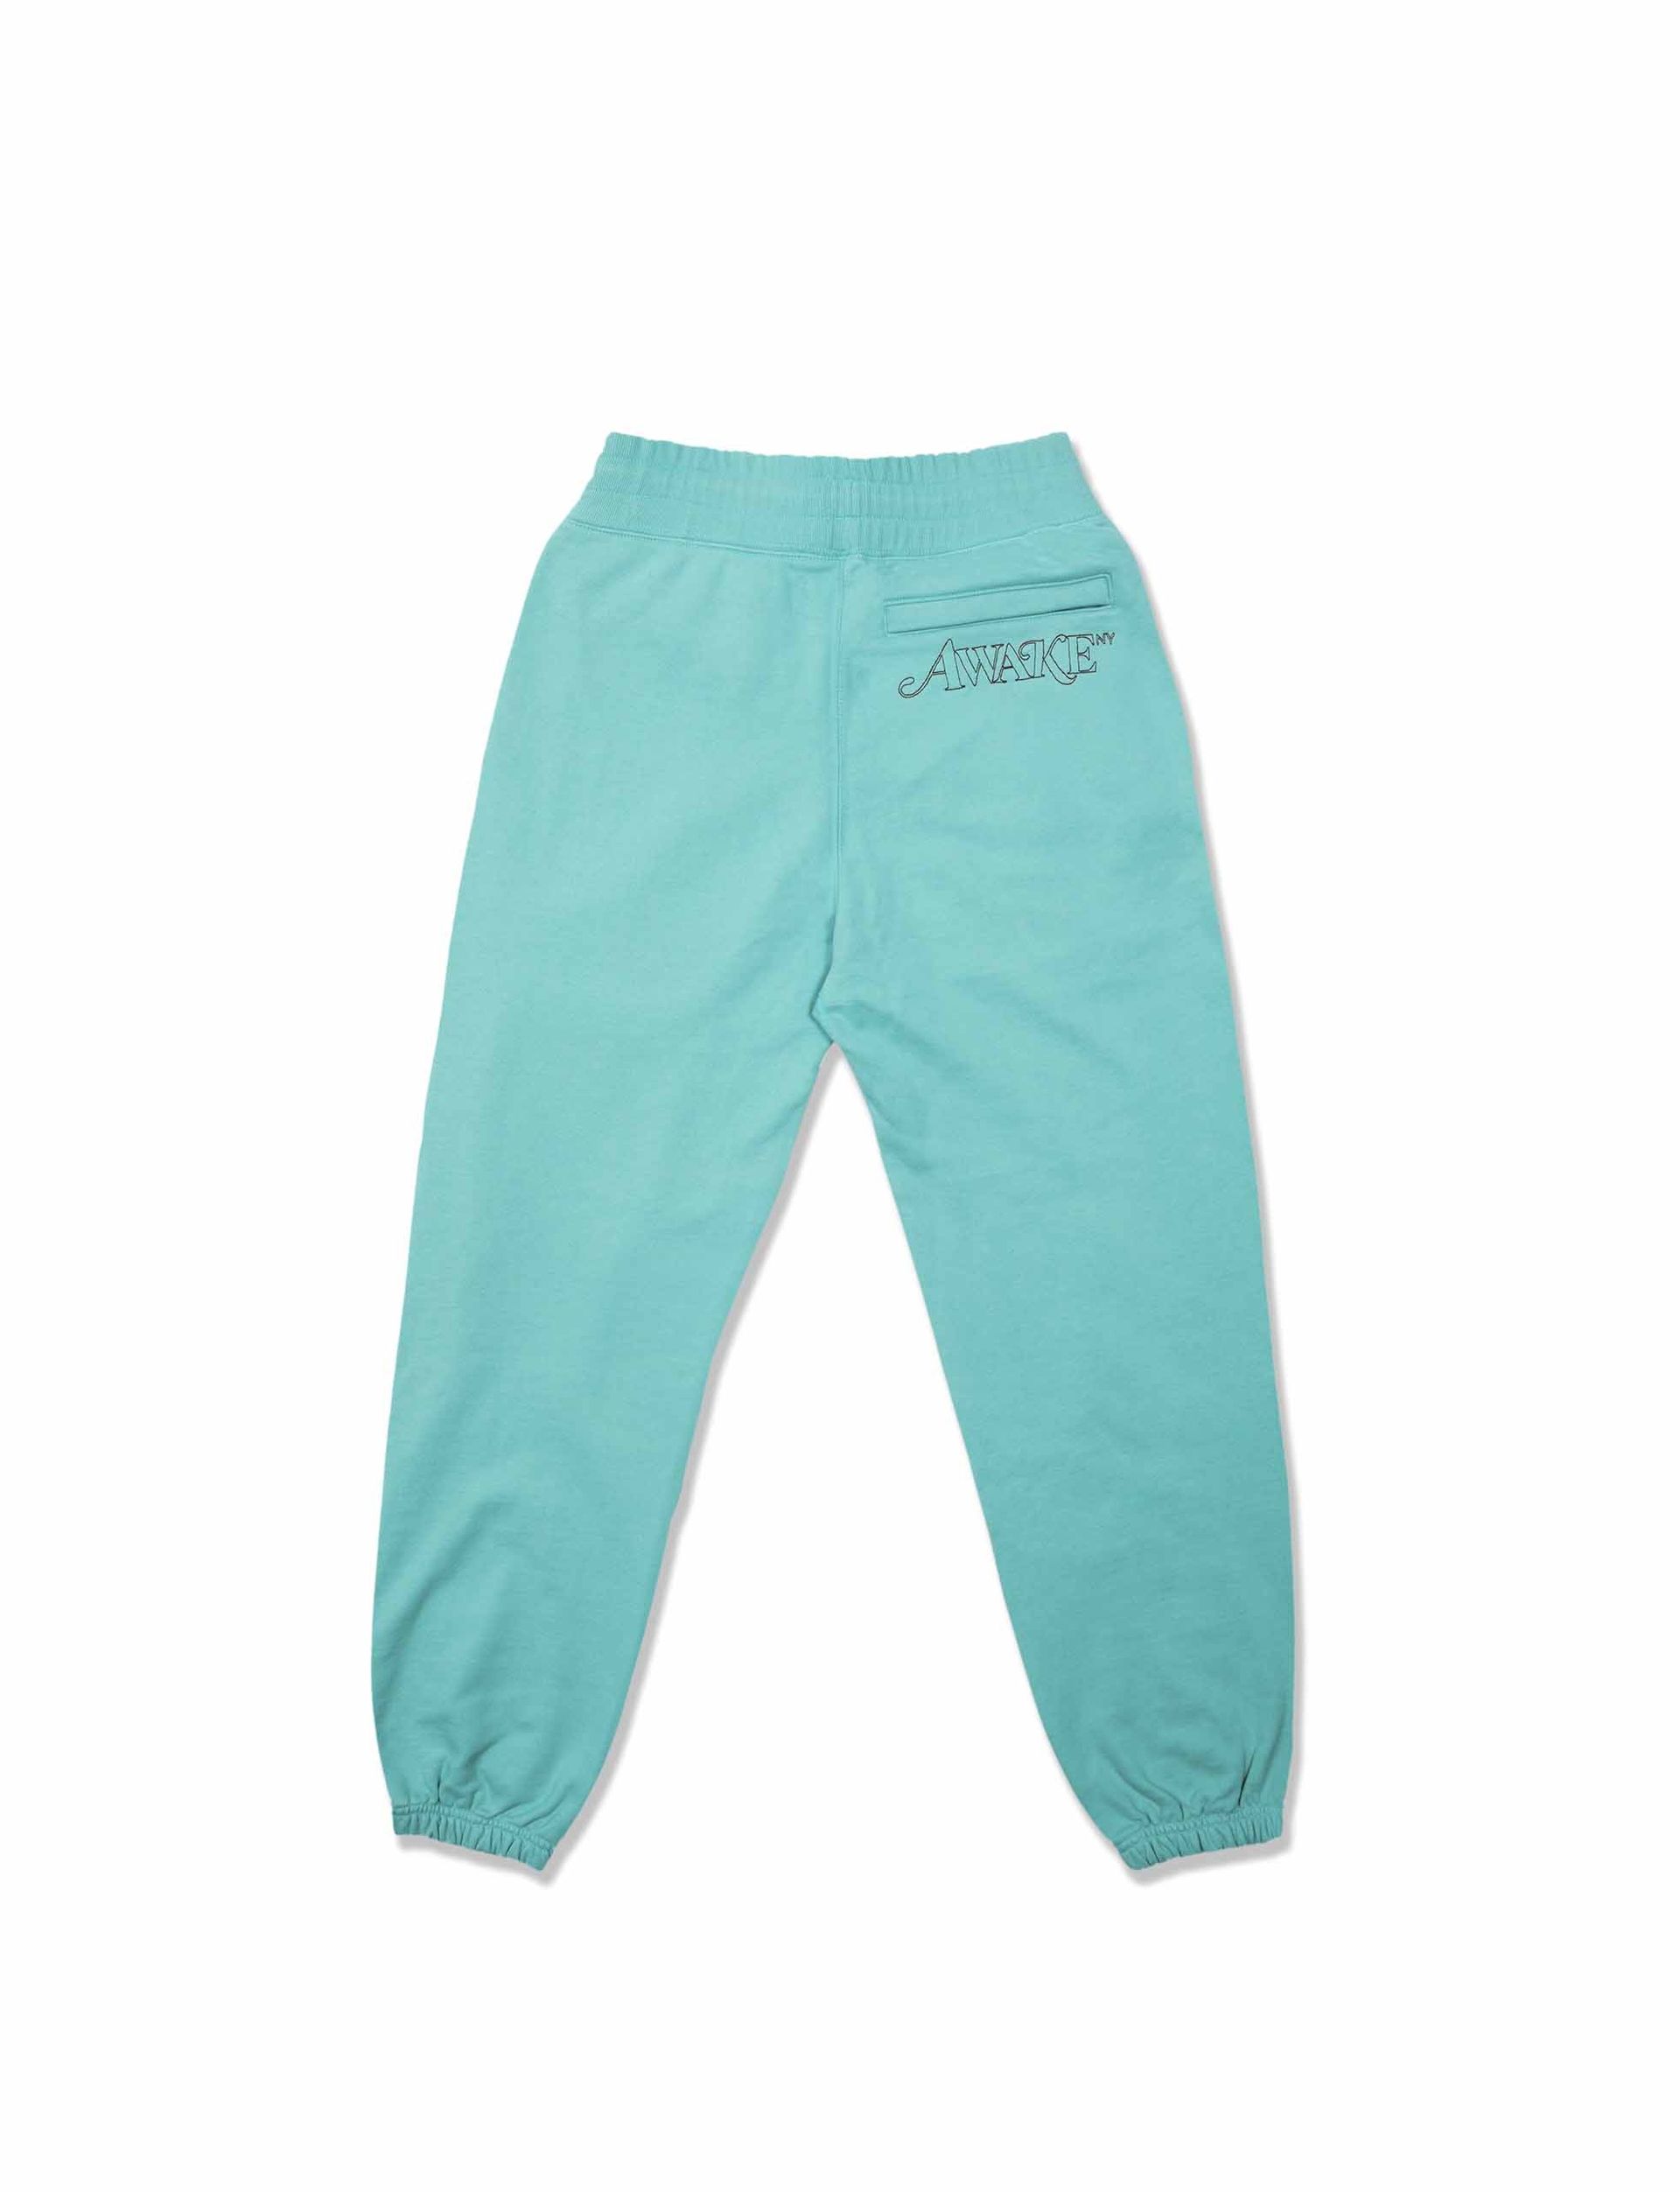 AWAKE CLASSIC OUTLINE LOGO EMBROIDERED SWEATPANTS (TEAL)